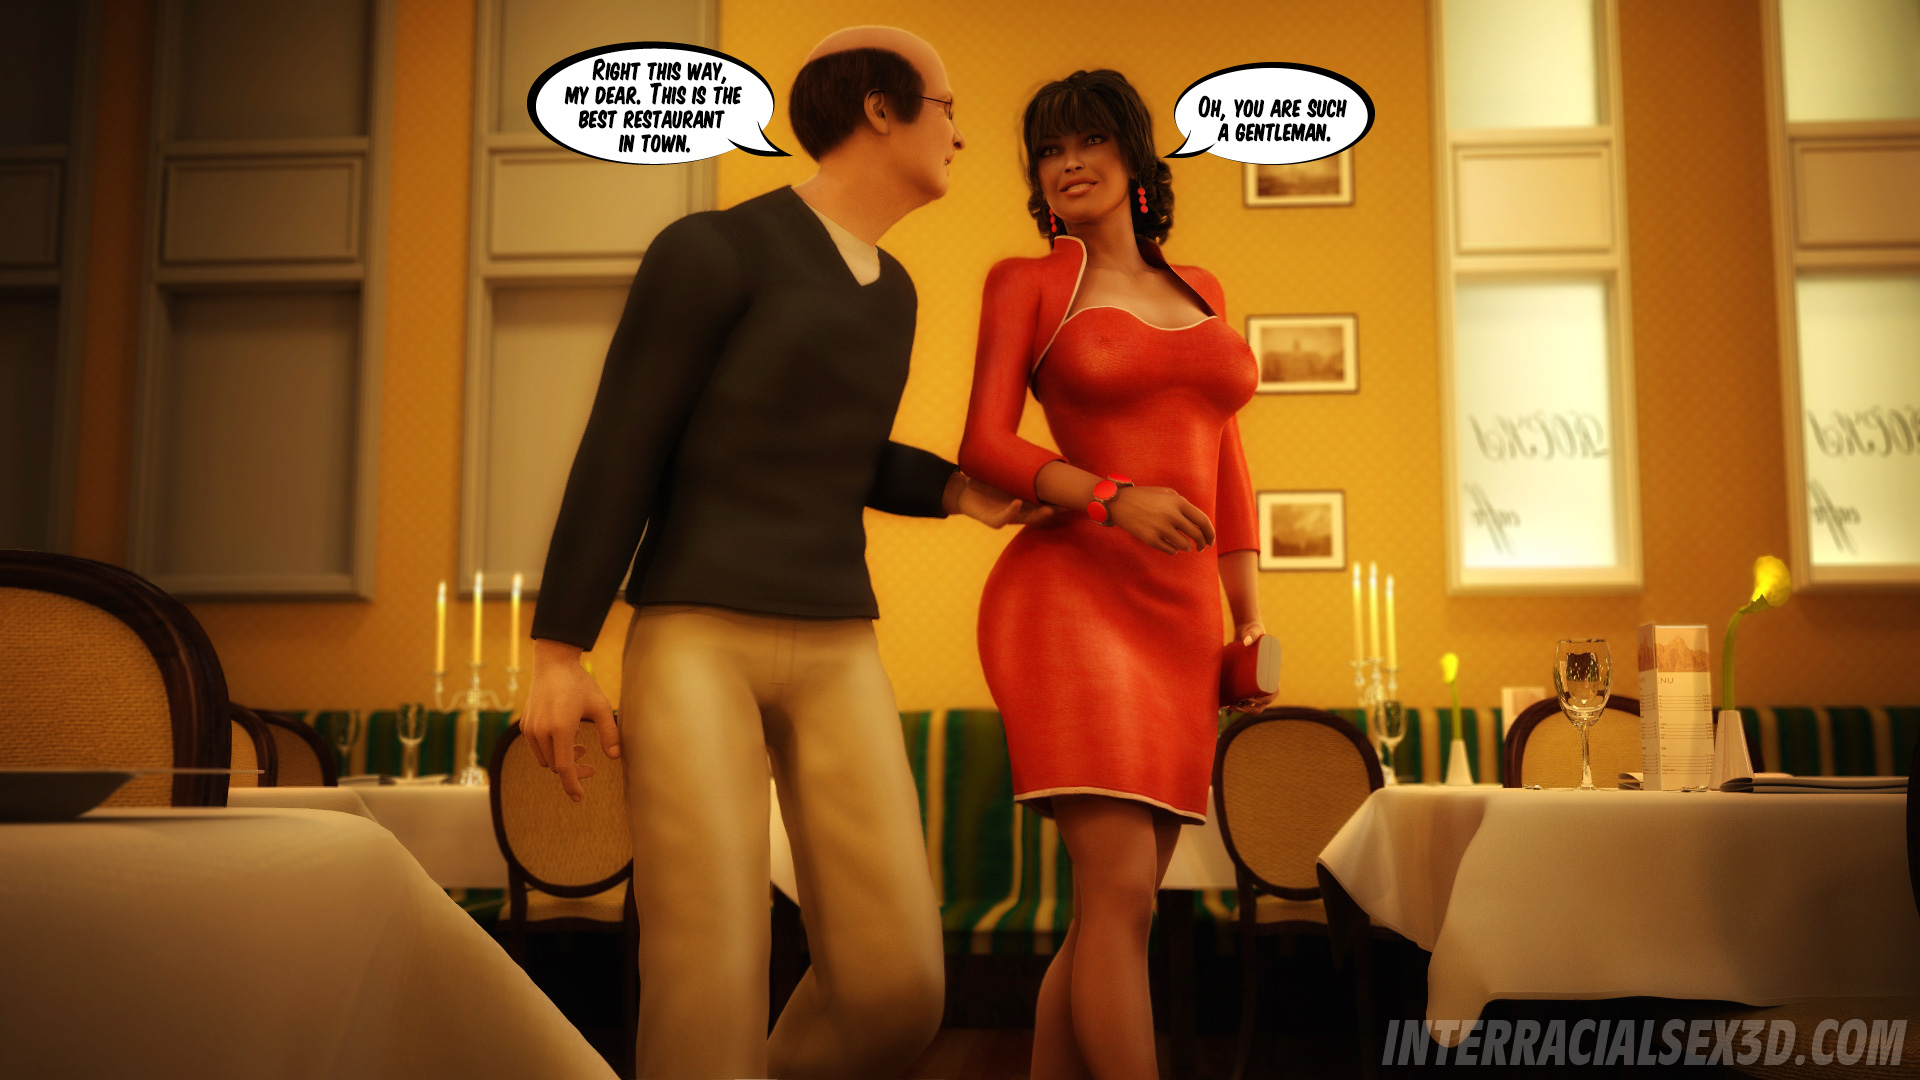 Wedding Anniversary and Cheating Wife Interracialsex3D - Wedding Anniversary and Cheating Wife pic